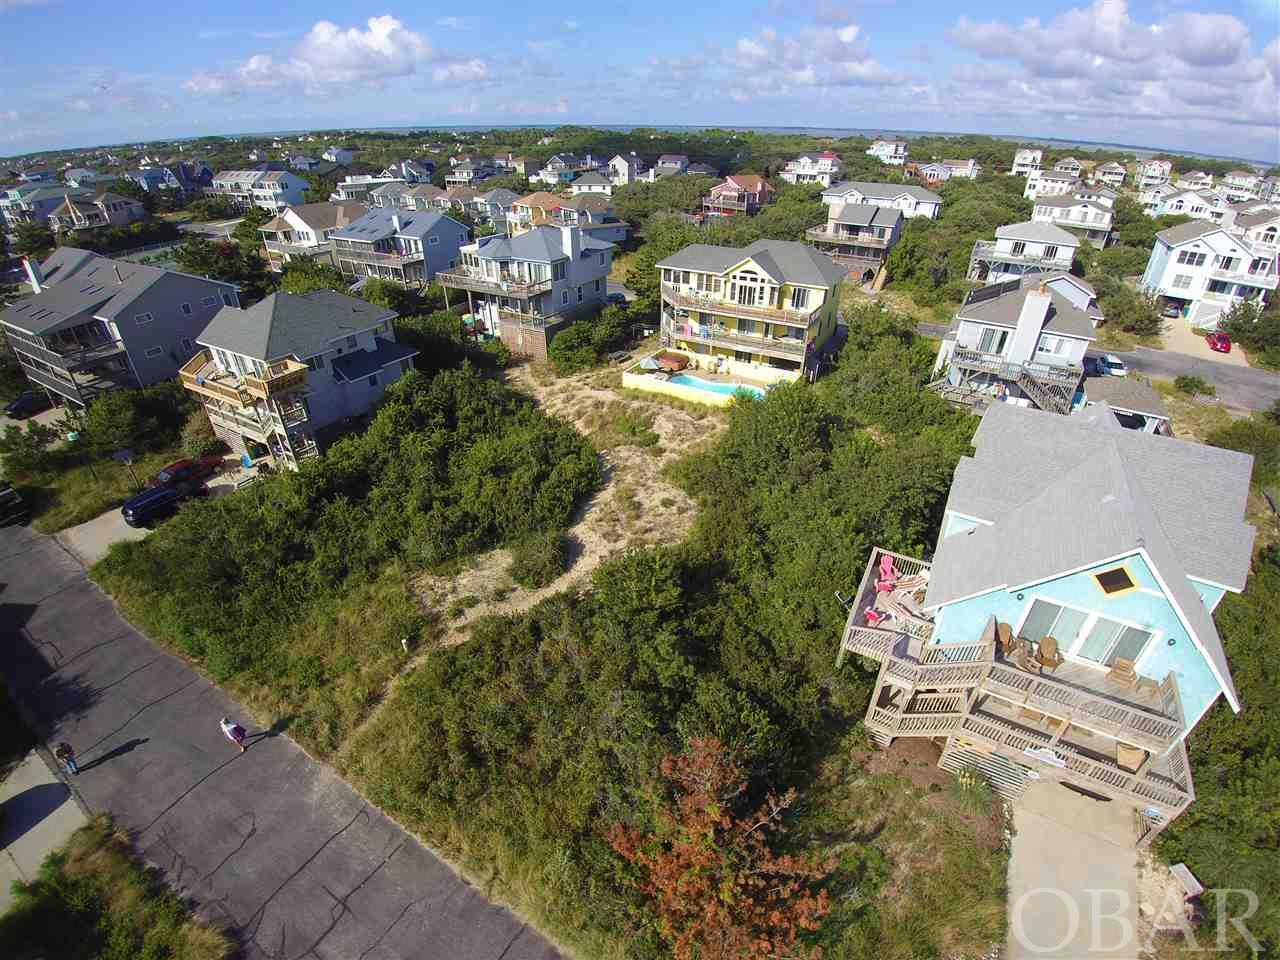 564 Porpoise Point, Corolla, NC 27927, ,Lots/land,For sale,Porpoise Point,99520